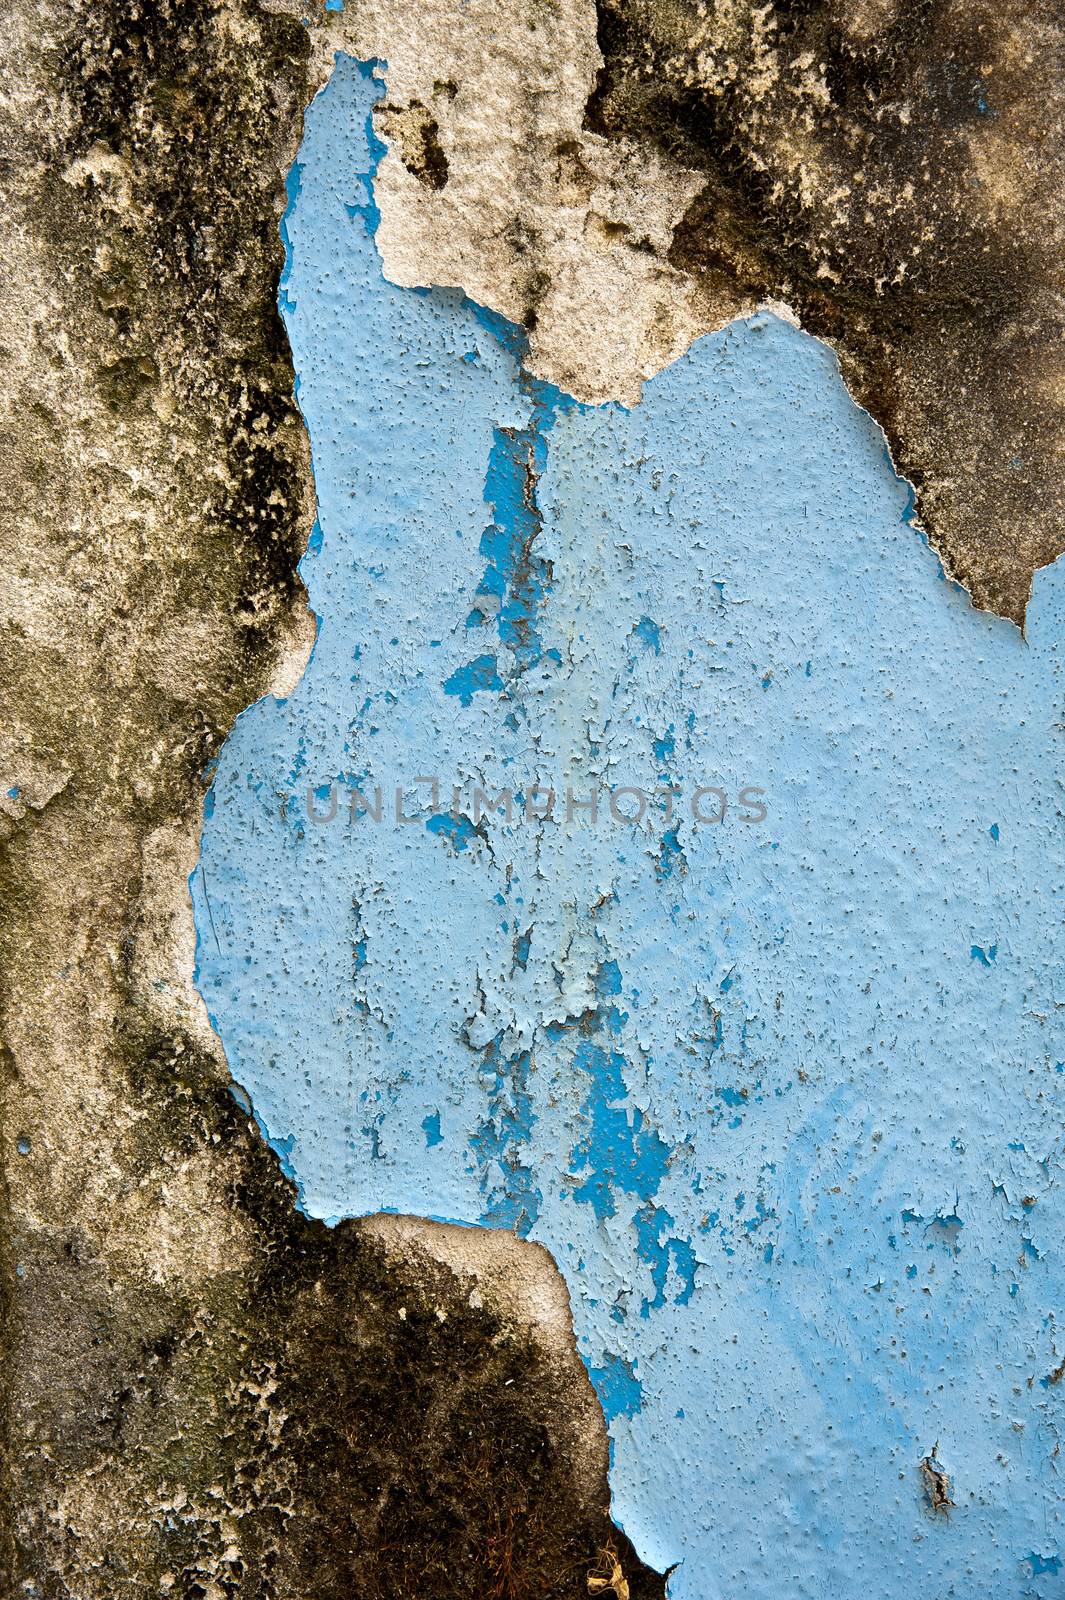 A blue grunge texture with other colors inside